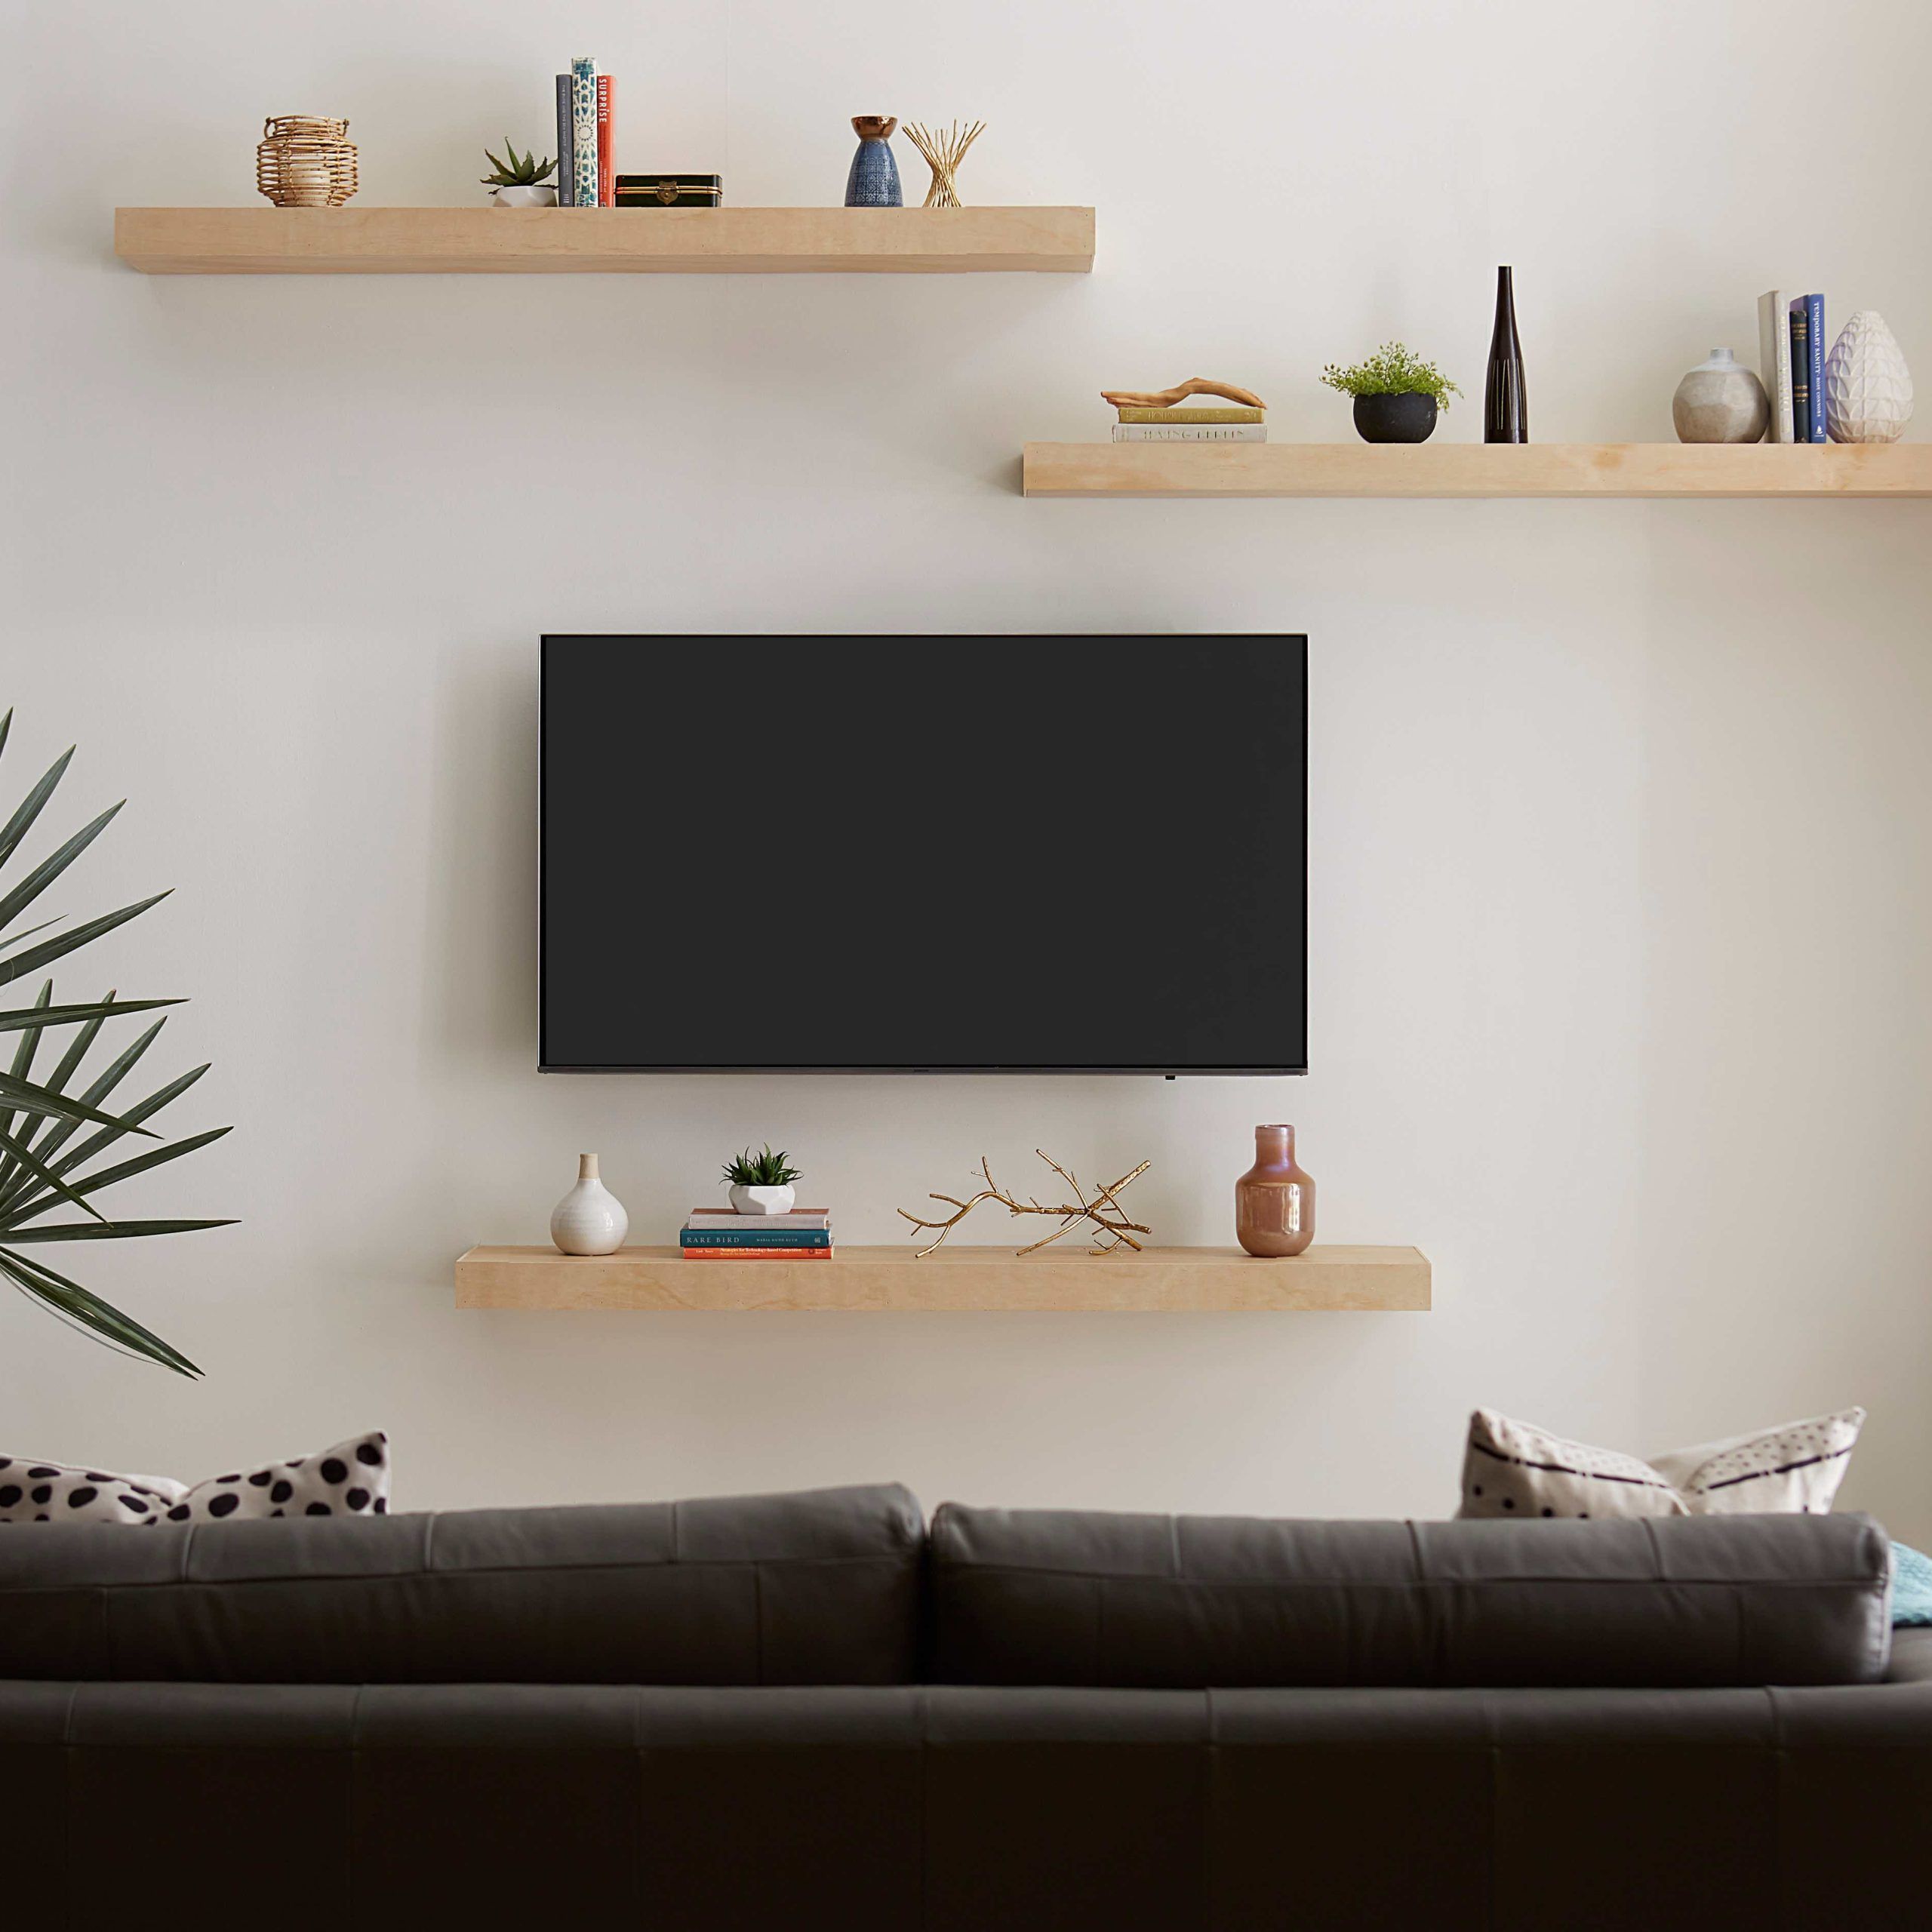 How To Decorate Around Your Tv With Floating Shelves Intended For Floating Stands For Tvs (View 9 of 15)